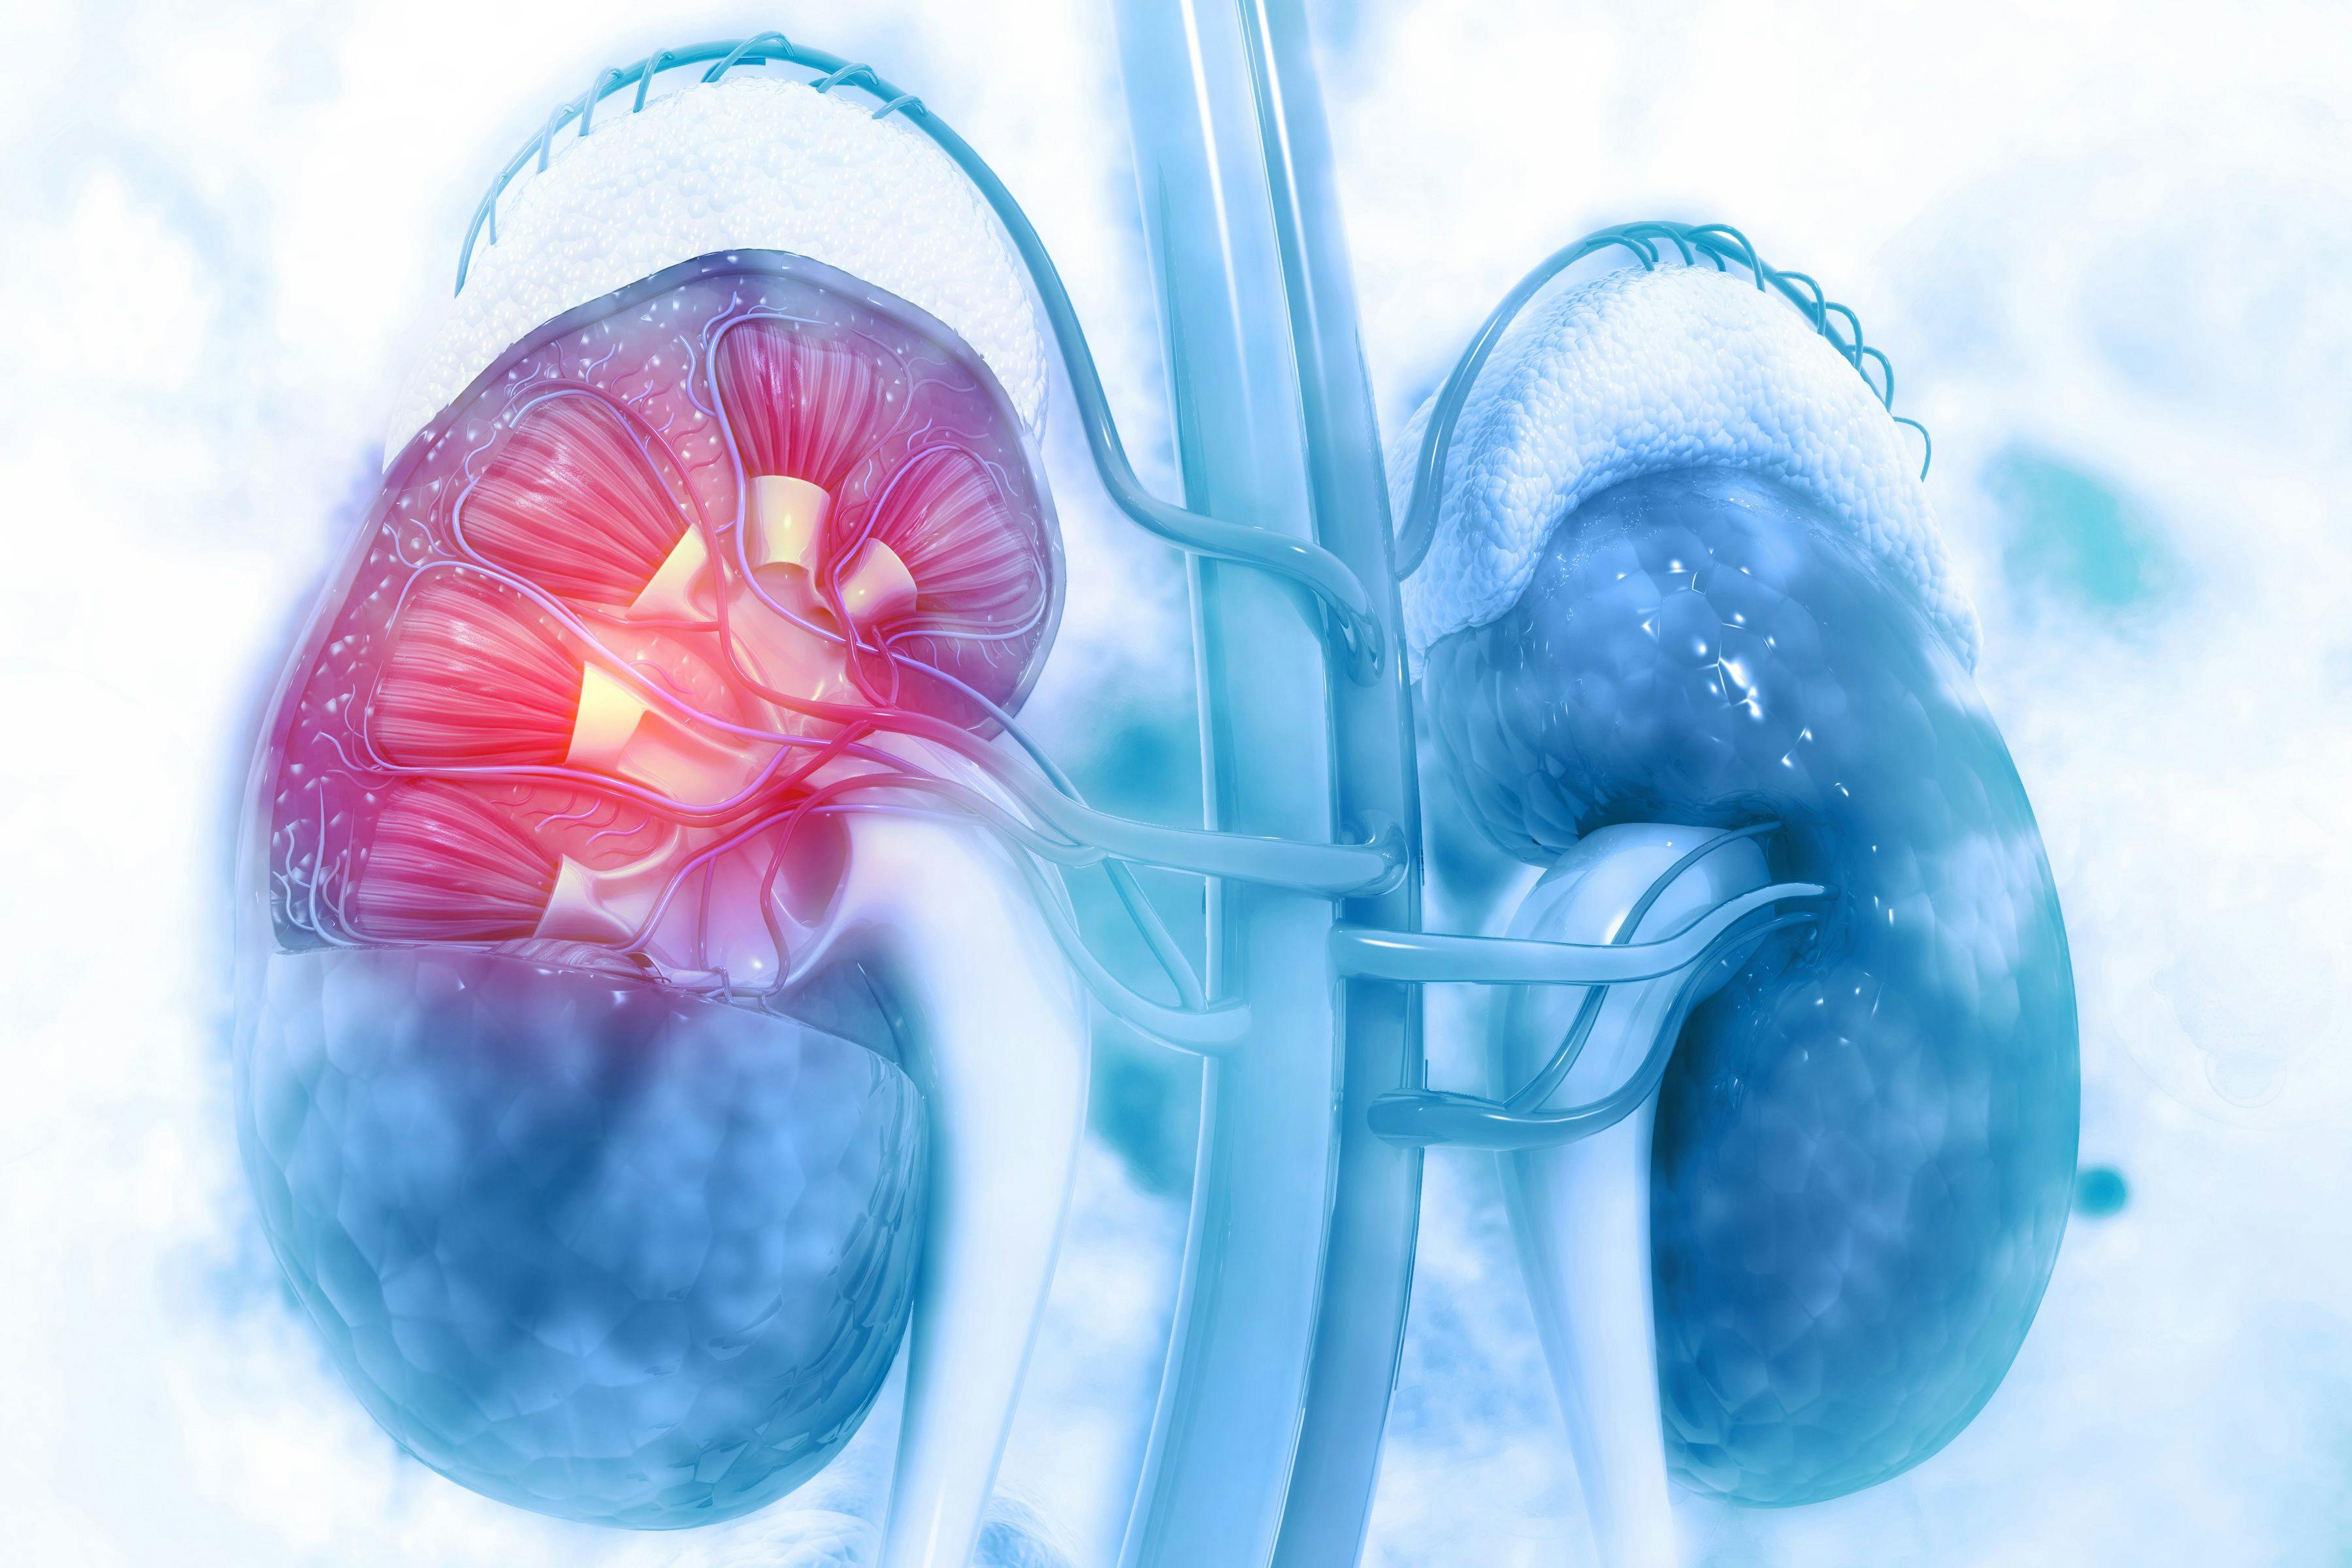 Treatment with cabozantinib in the second-line yielded responses in patients with advanced renal cell carcinoma who received immunotherapy in the frontline.